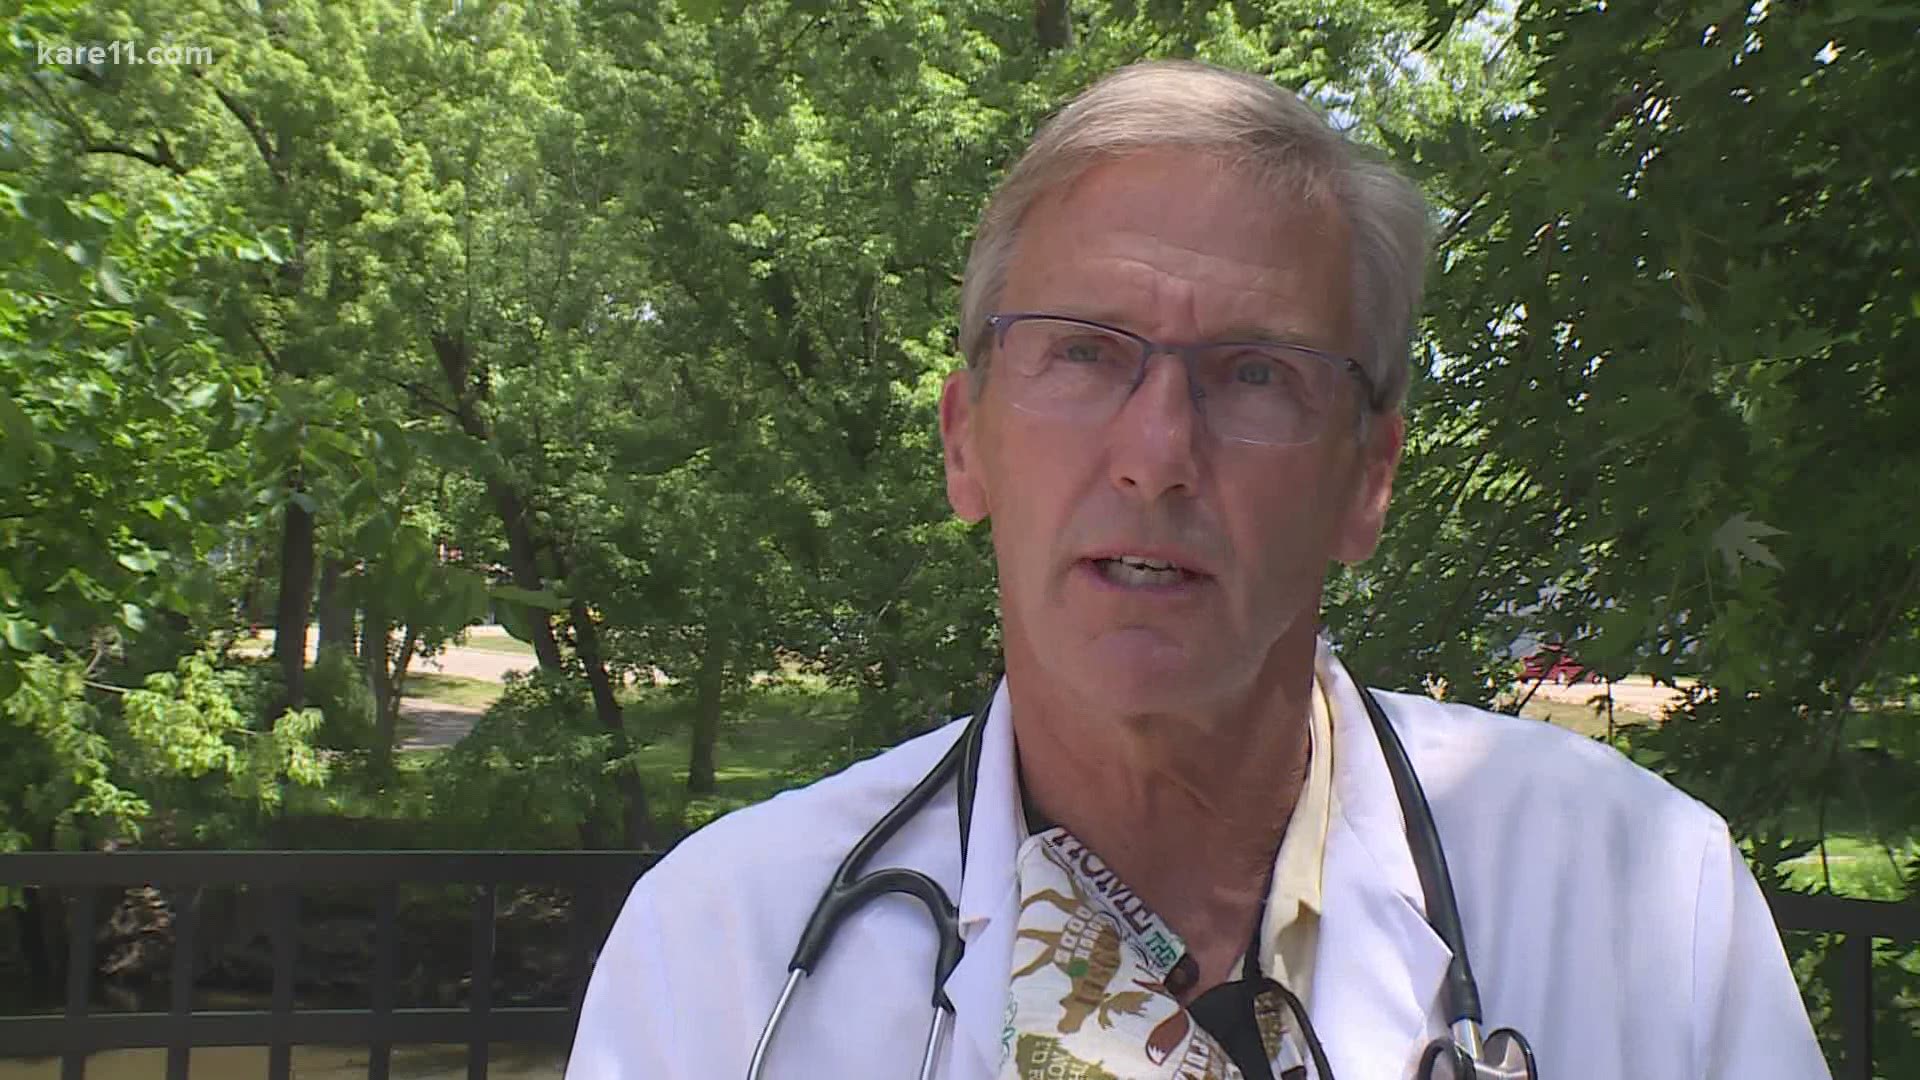 Sen. Scott Jensen, who's also a physician, revealed the Minn. Board of Medical Practices is investigating complaints about his public statements on COVID-19 deaths